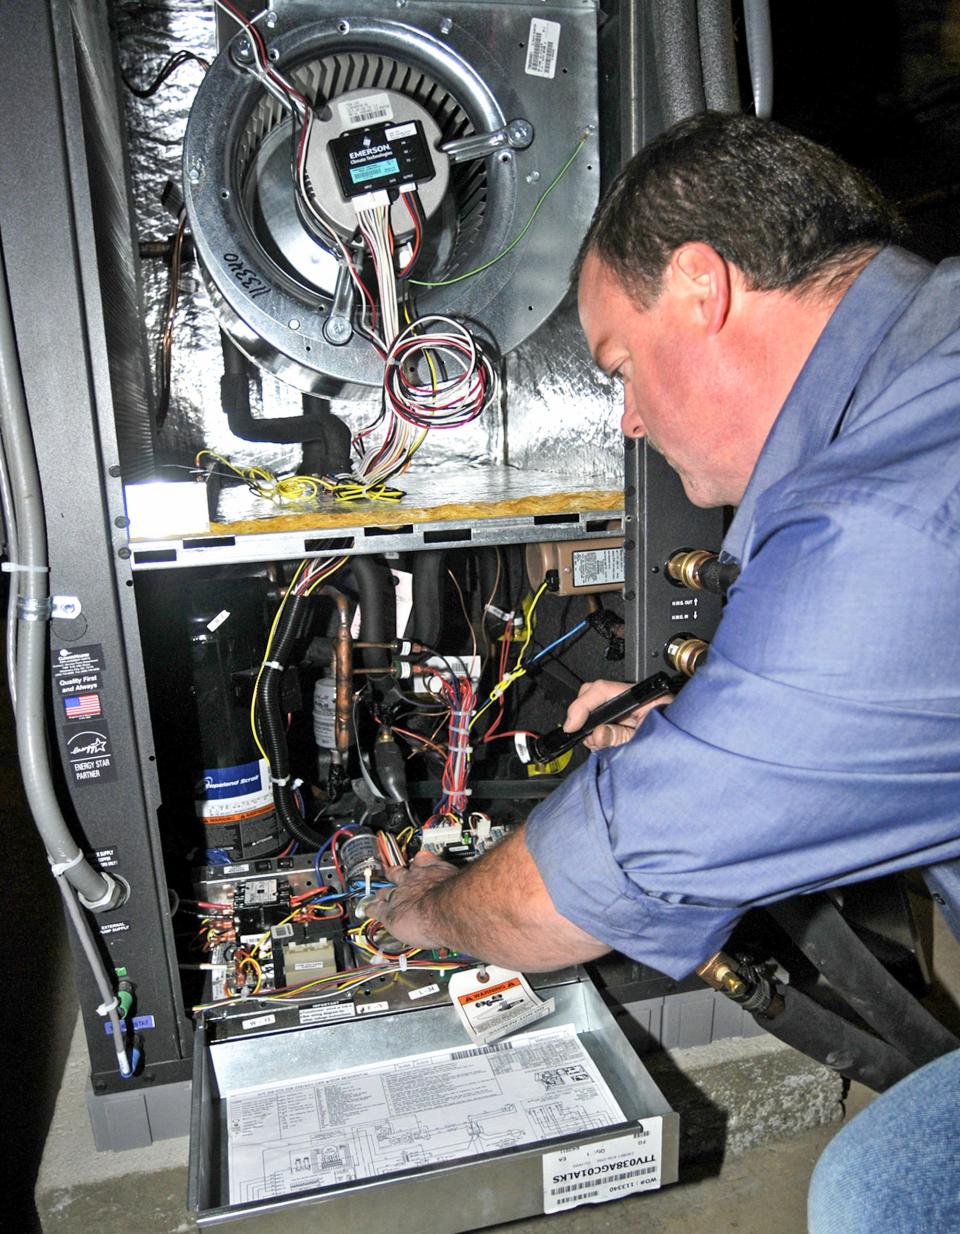 A technician looks over a newly installed geothermal heat pump system.